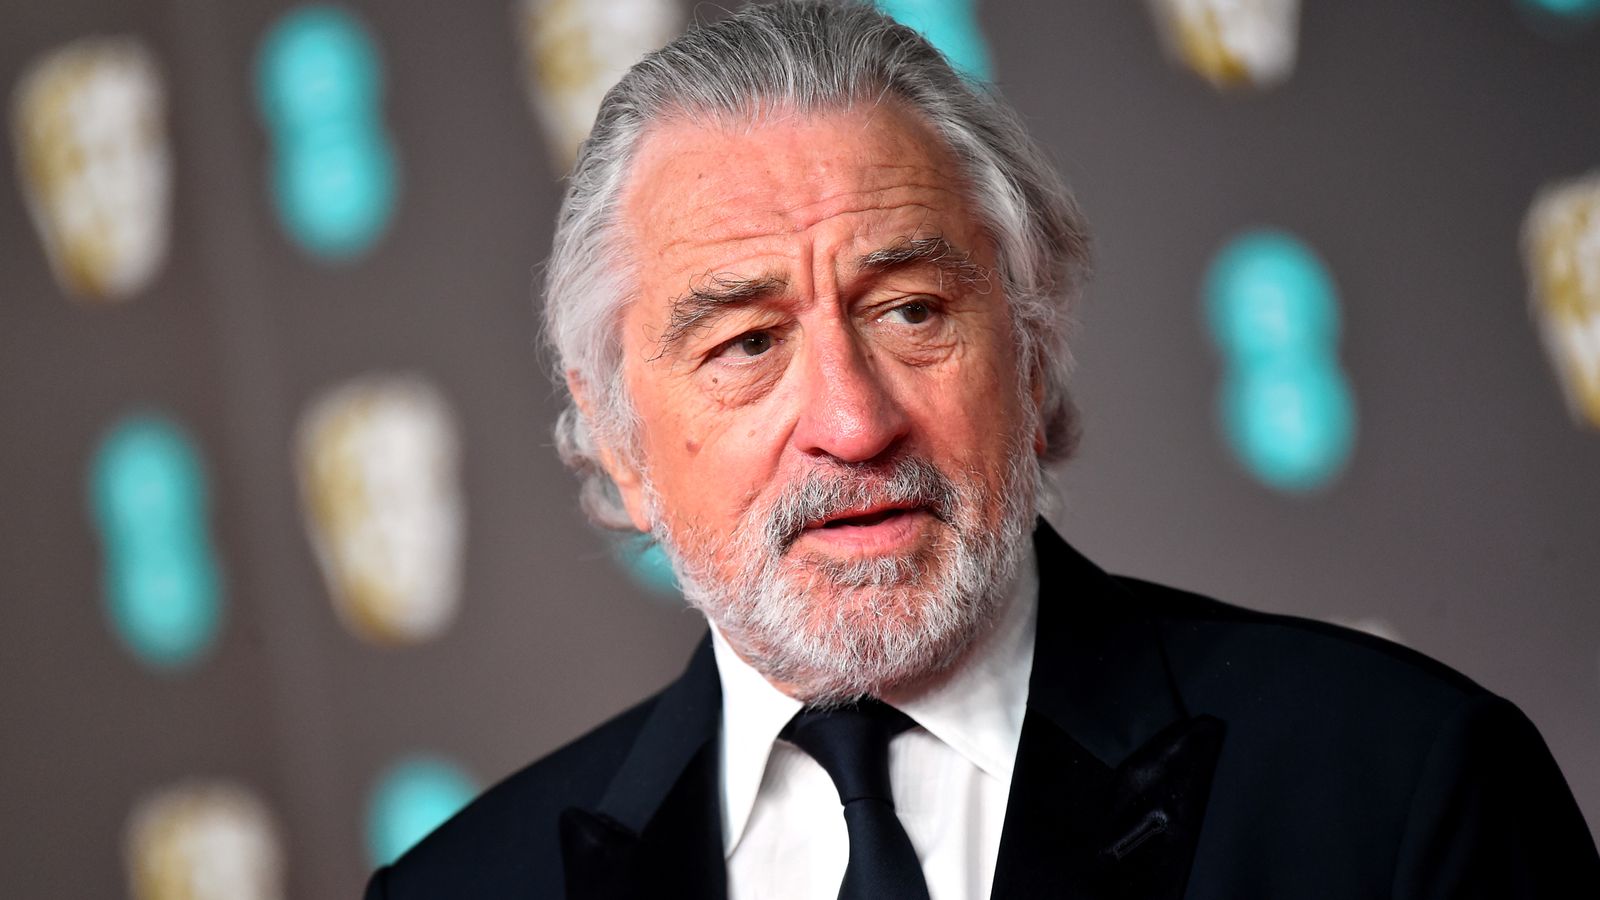 Robert De Niro's company ordered to pay .2m in gender discrimination lawsuit - but star not personally liable